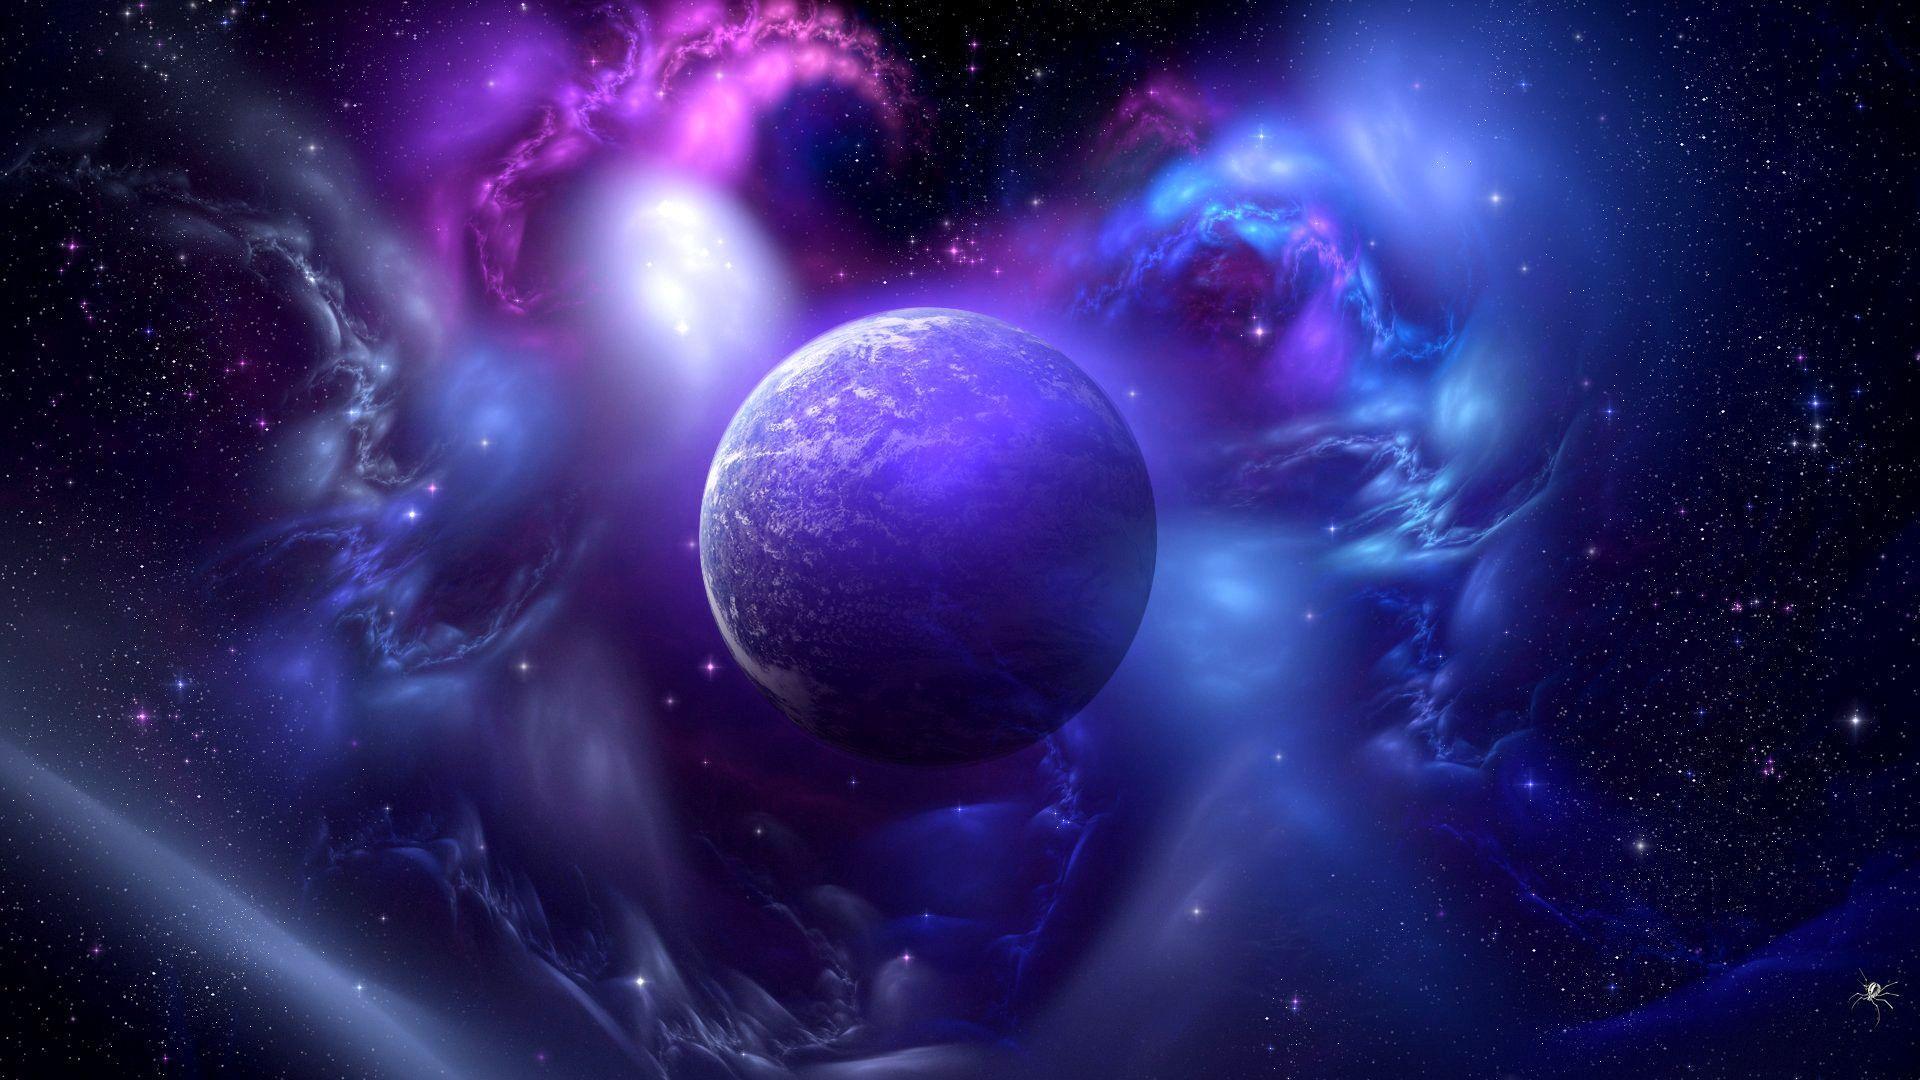 Hd Real Space Wallpaper 1080P Background 1 HD Wallpaper. lzamgs